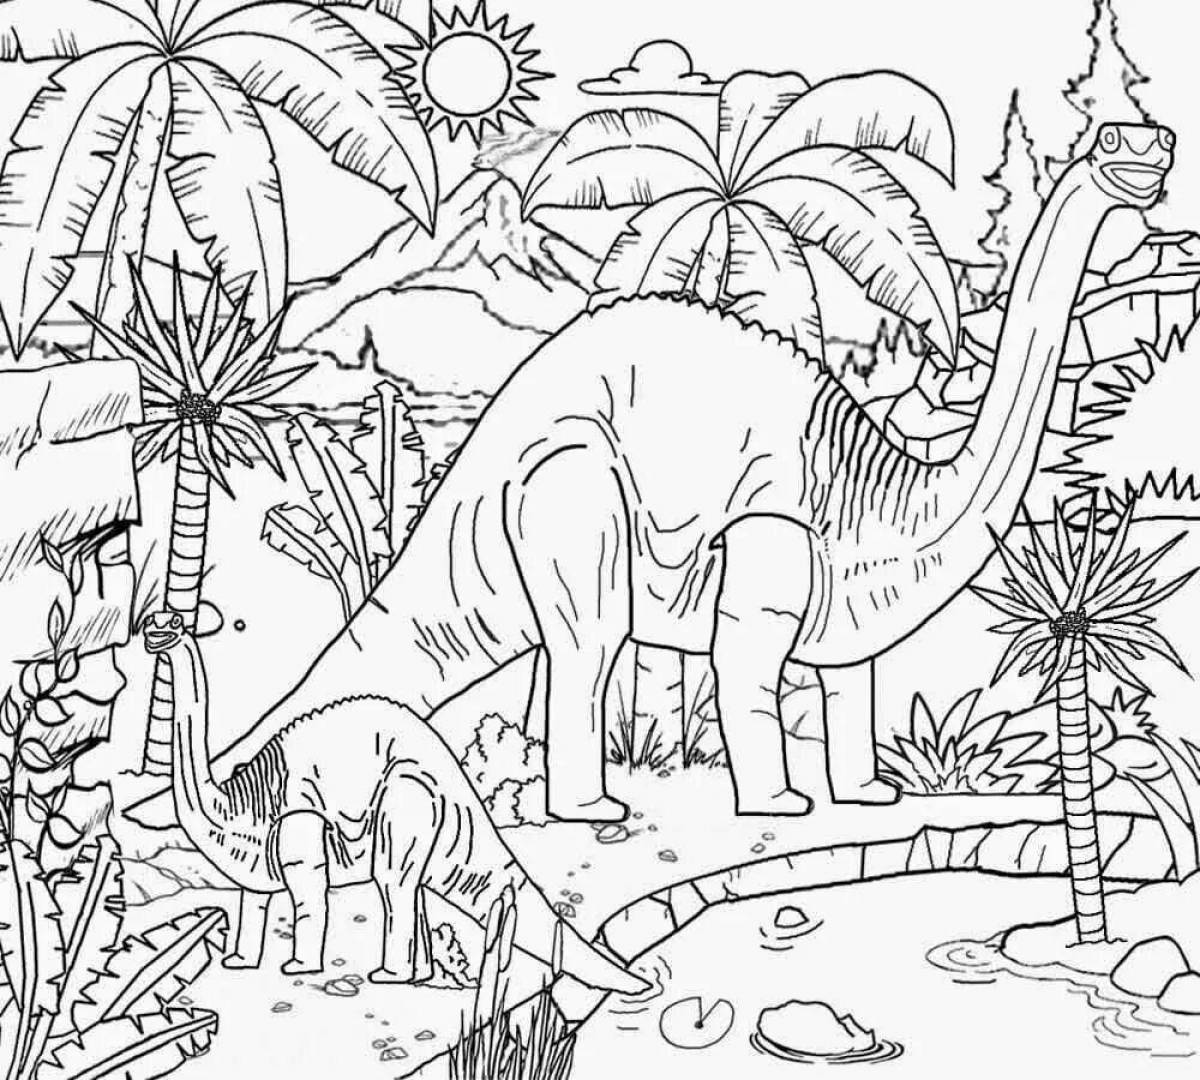 Fabulous lost worlds coloring book